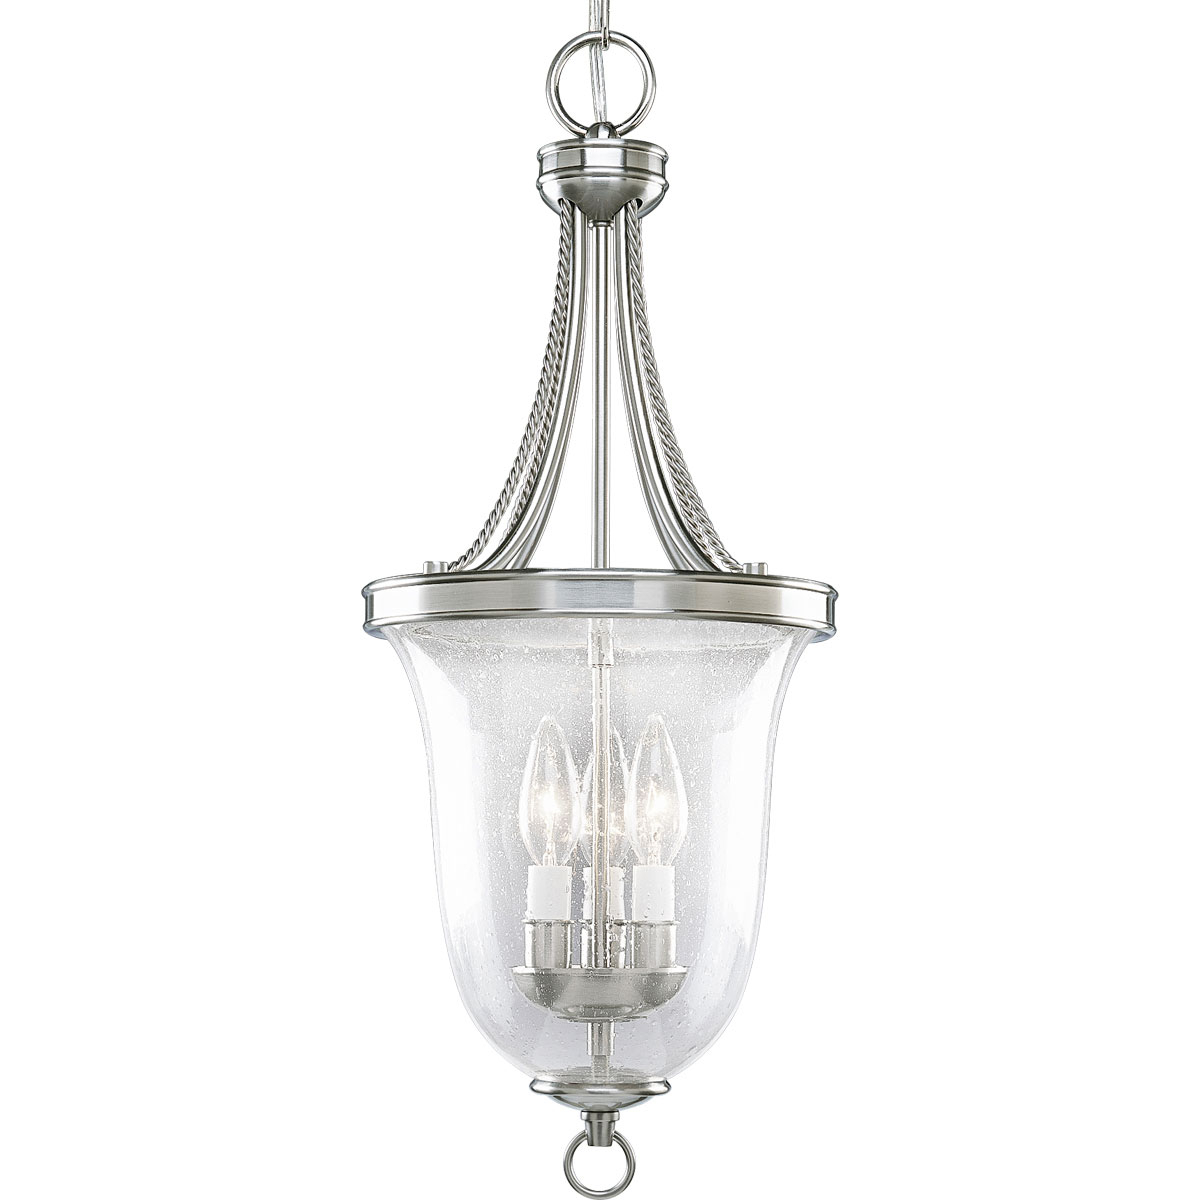 Three-light foyer pendant with clear seeded glass, delicate rope detailing and candle cluster in bowl. Great for entry ways or kitchens. Brushed Nickel finish.